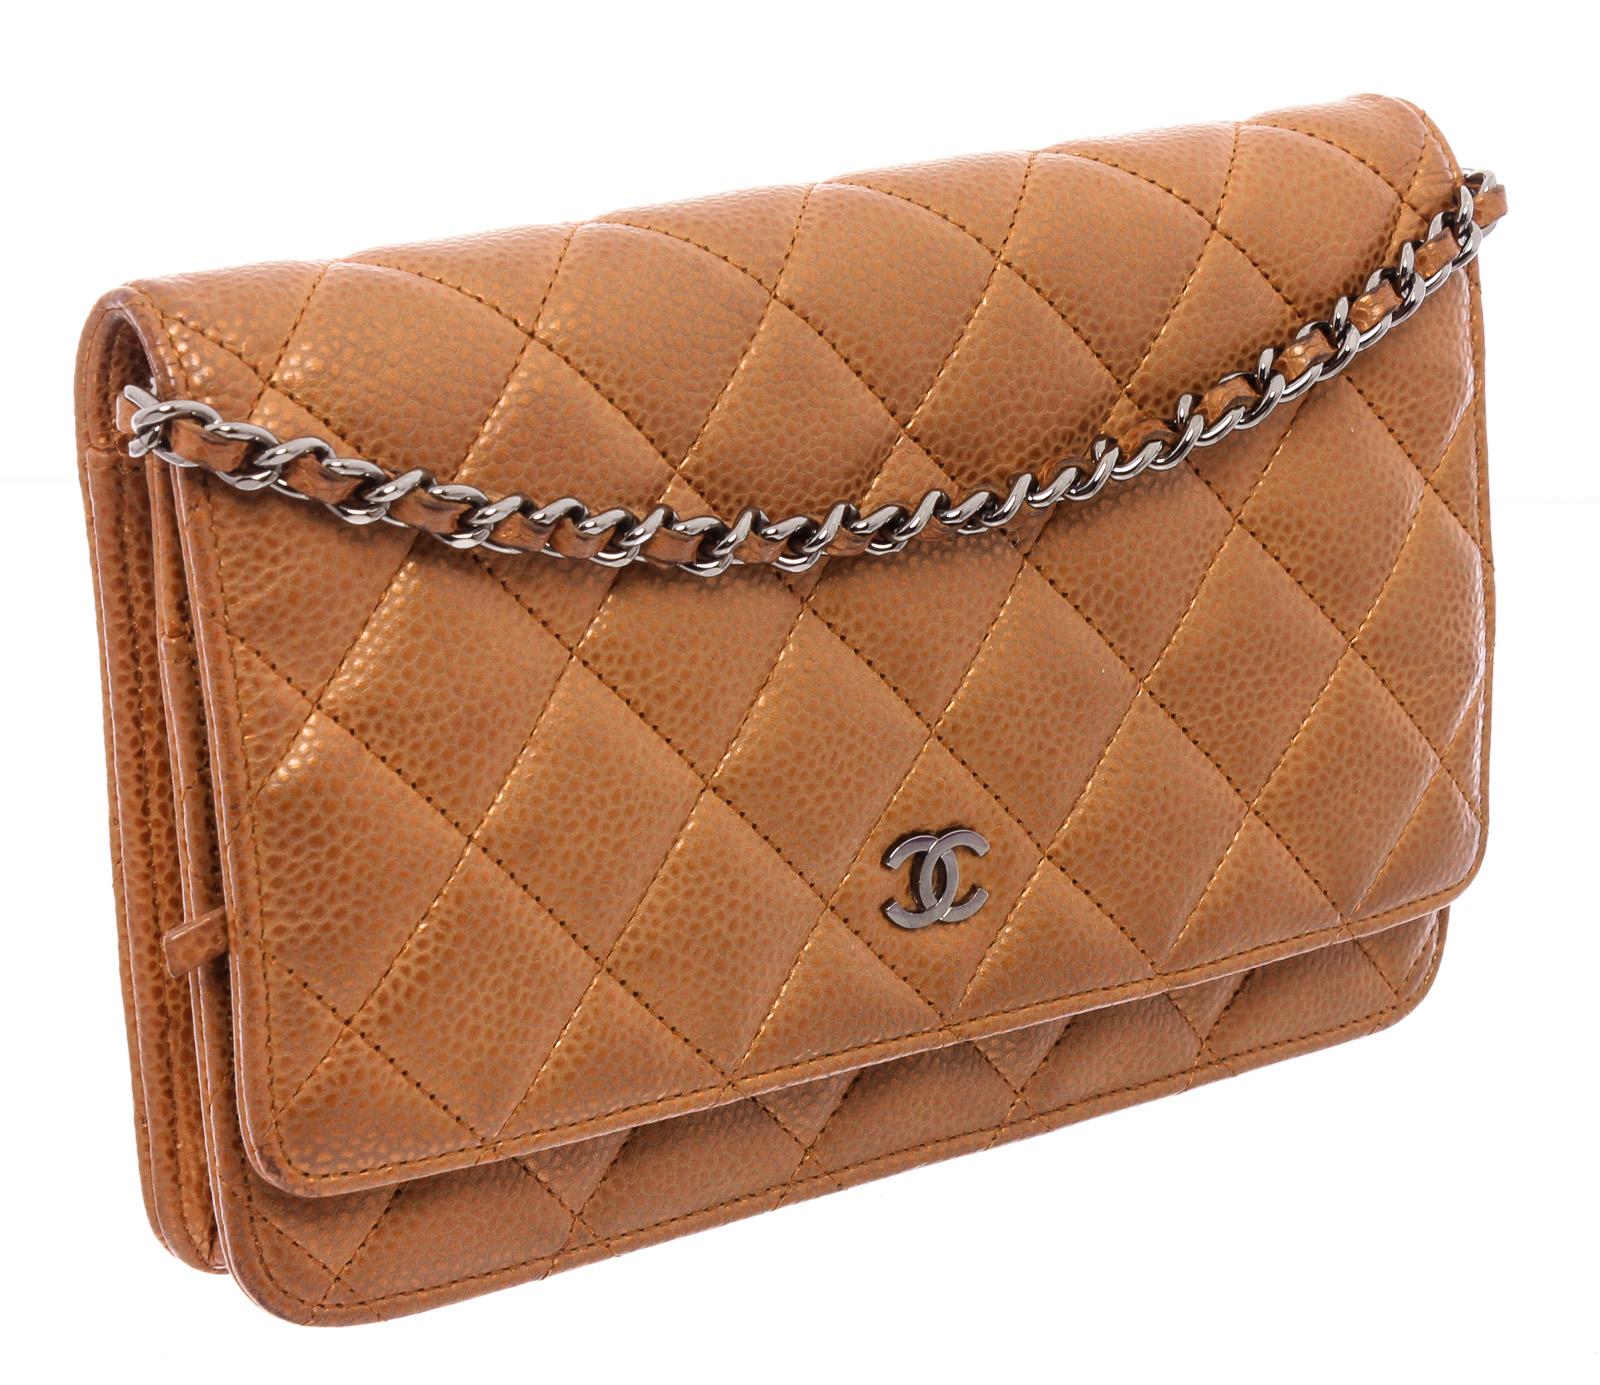 Bronze caviar quilted leather Chanel Classic Wallet On Chain with silver-tone hardware, single chain-link and leather shoulder strap, interlocking 'CC' adornment at front flap, single patch pocket at back, dual pockets at front flap underside; one